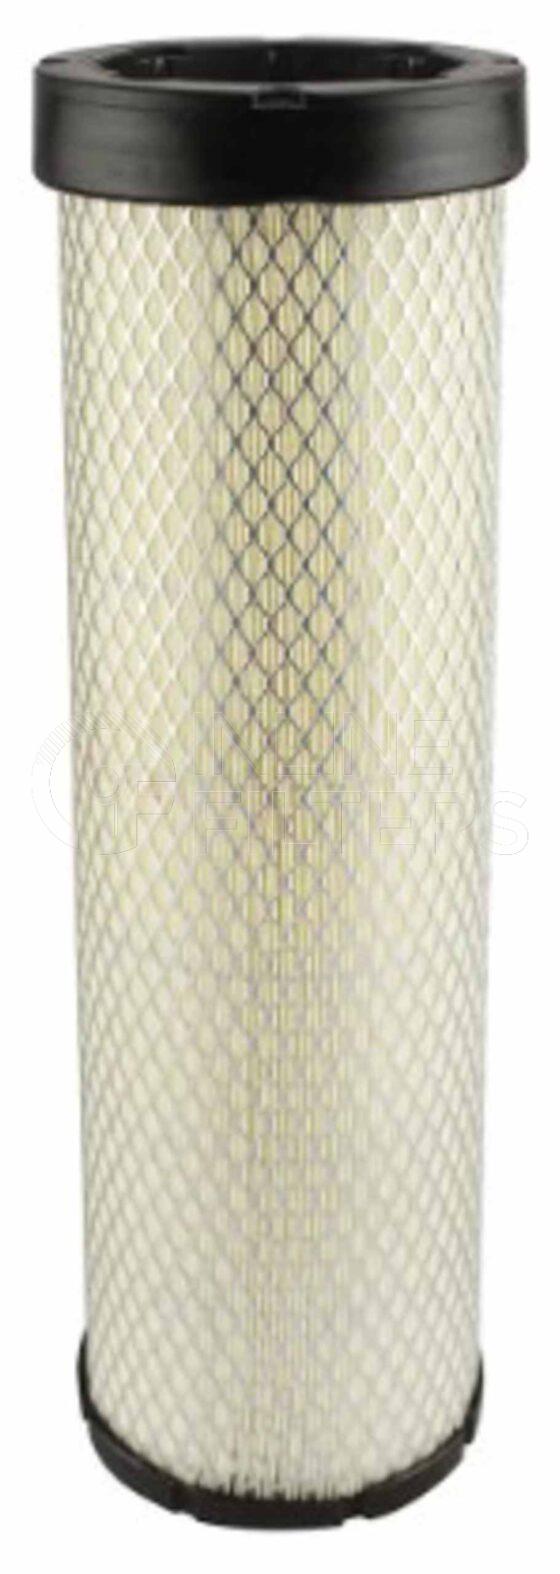 Inline FA19279. Air Filter Product – Cartridge – Round Product Filter